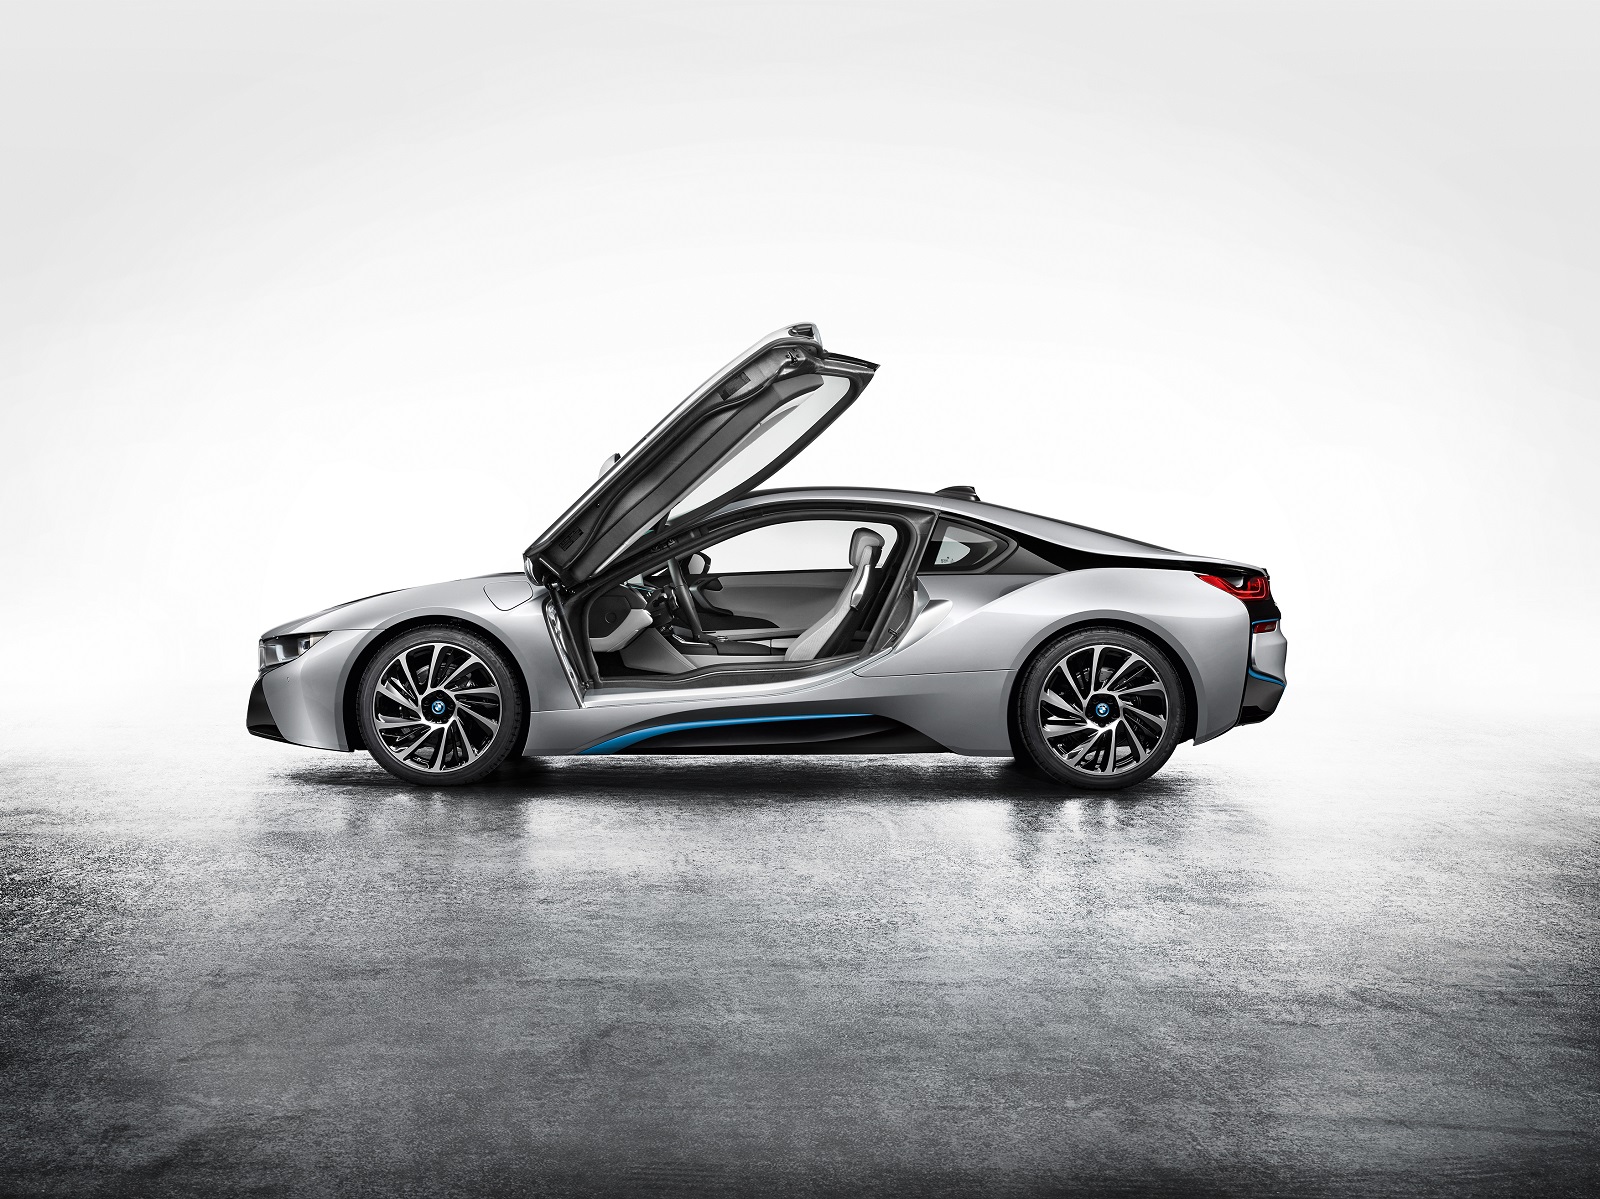 2015 BMW i8 Revealed, Priced From $135,925